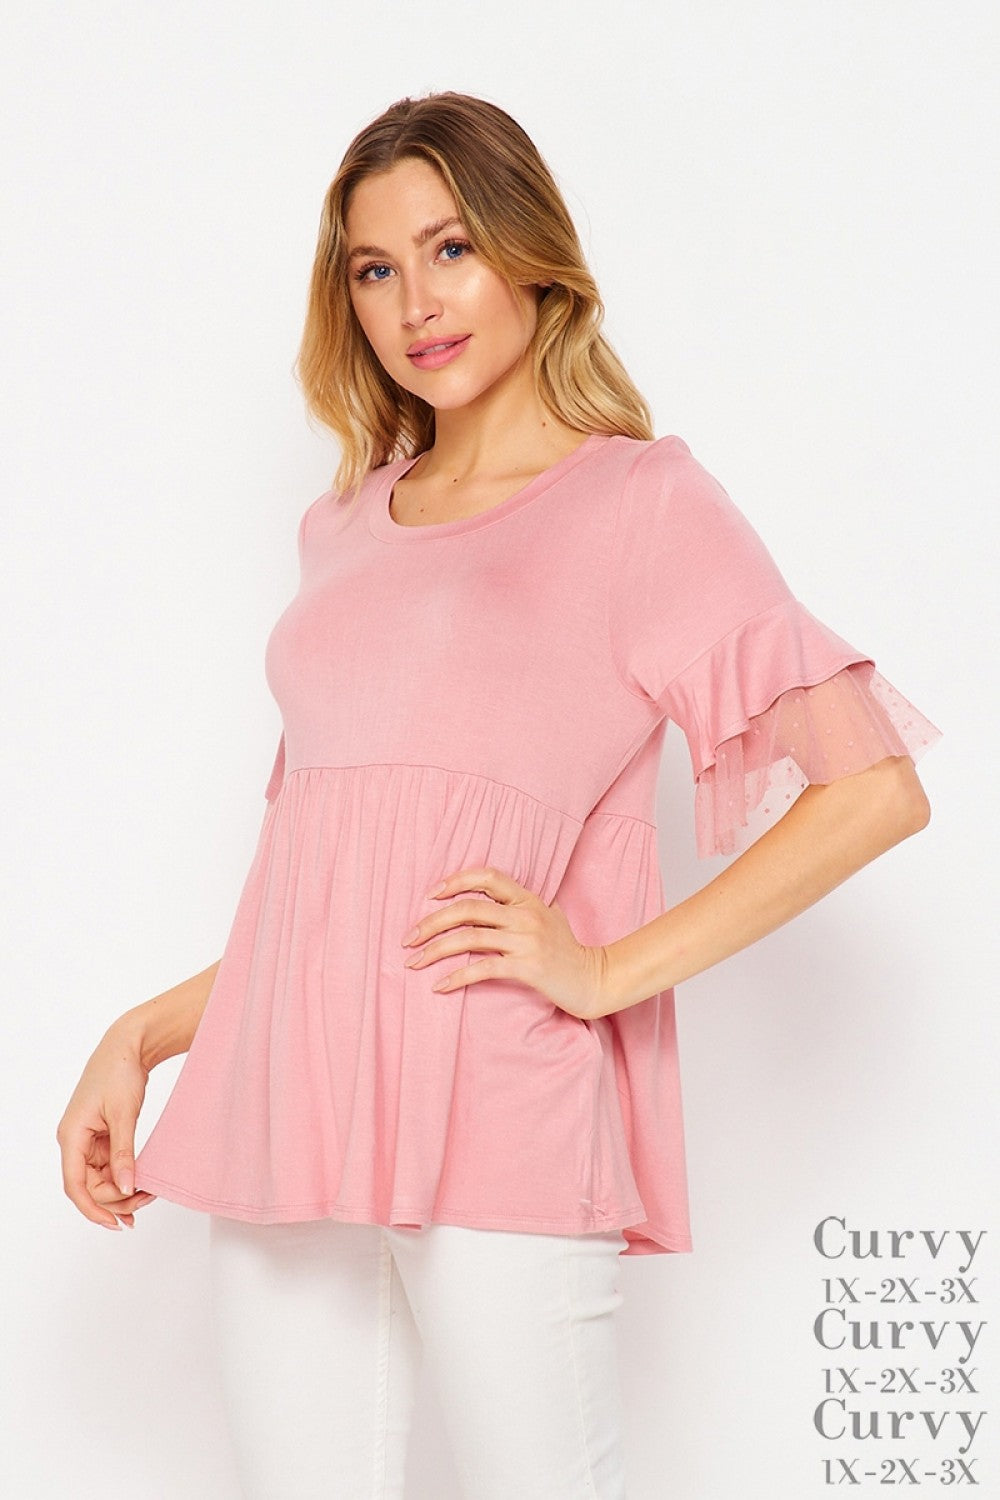 Baby Doll Top with Sheer Ruffle Sleeves - Mauve